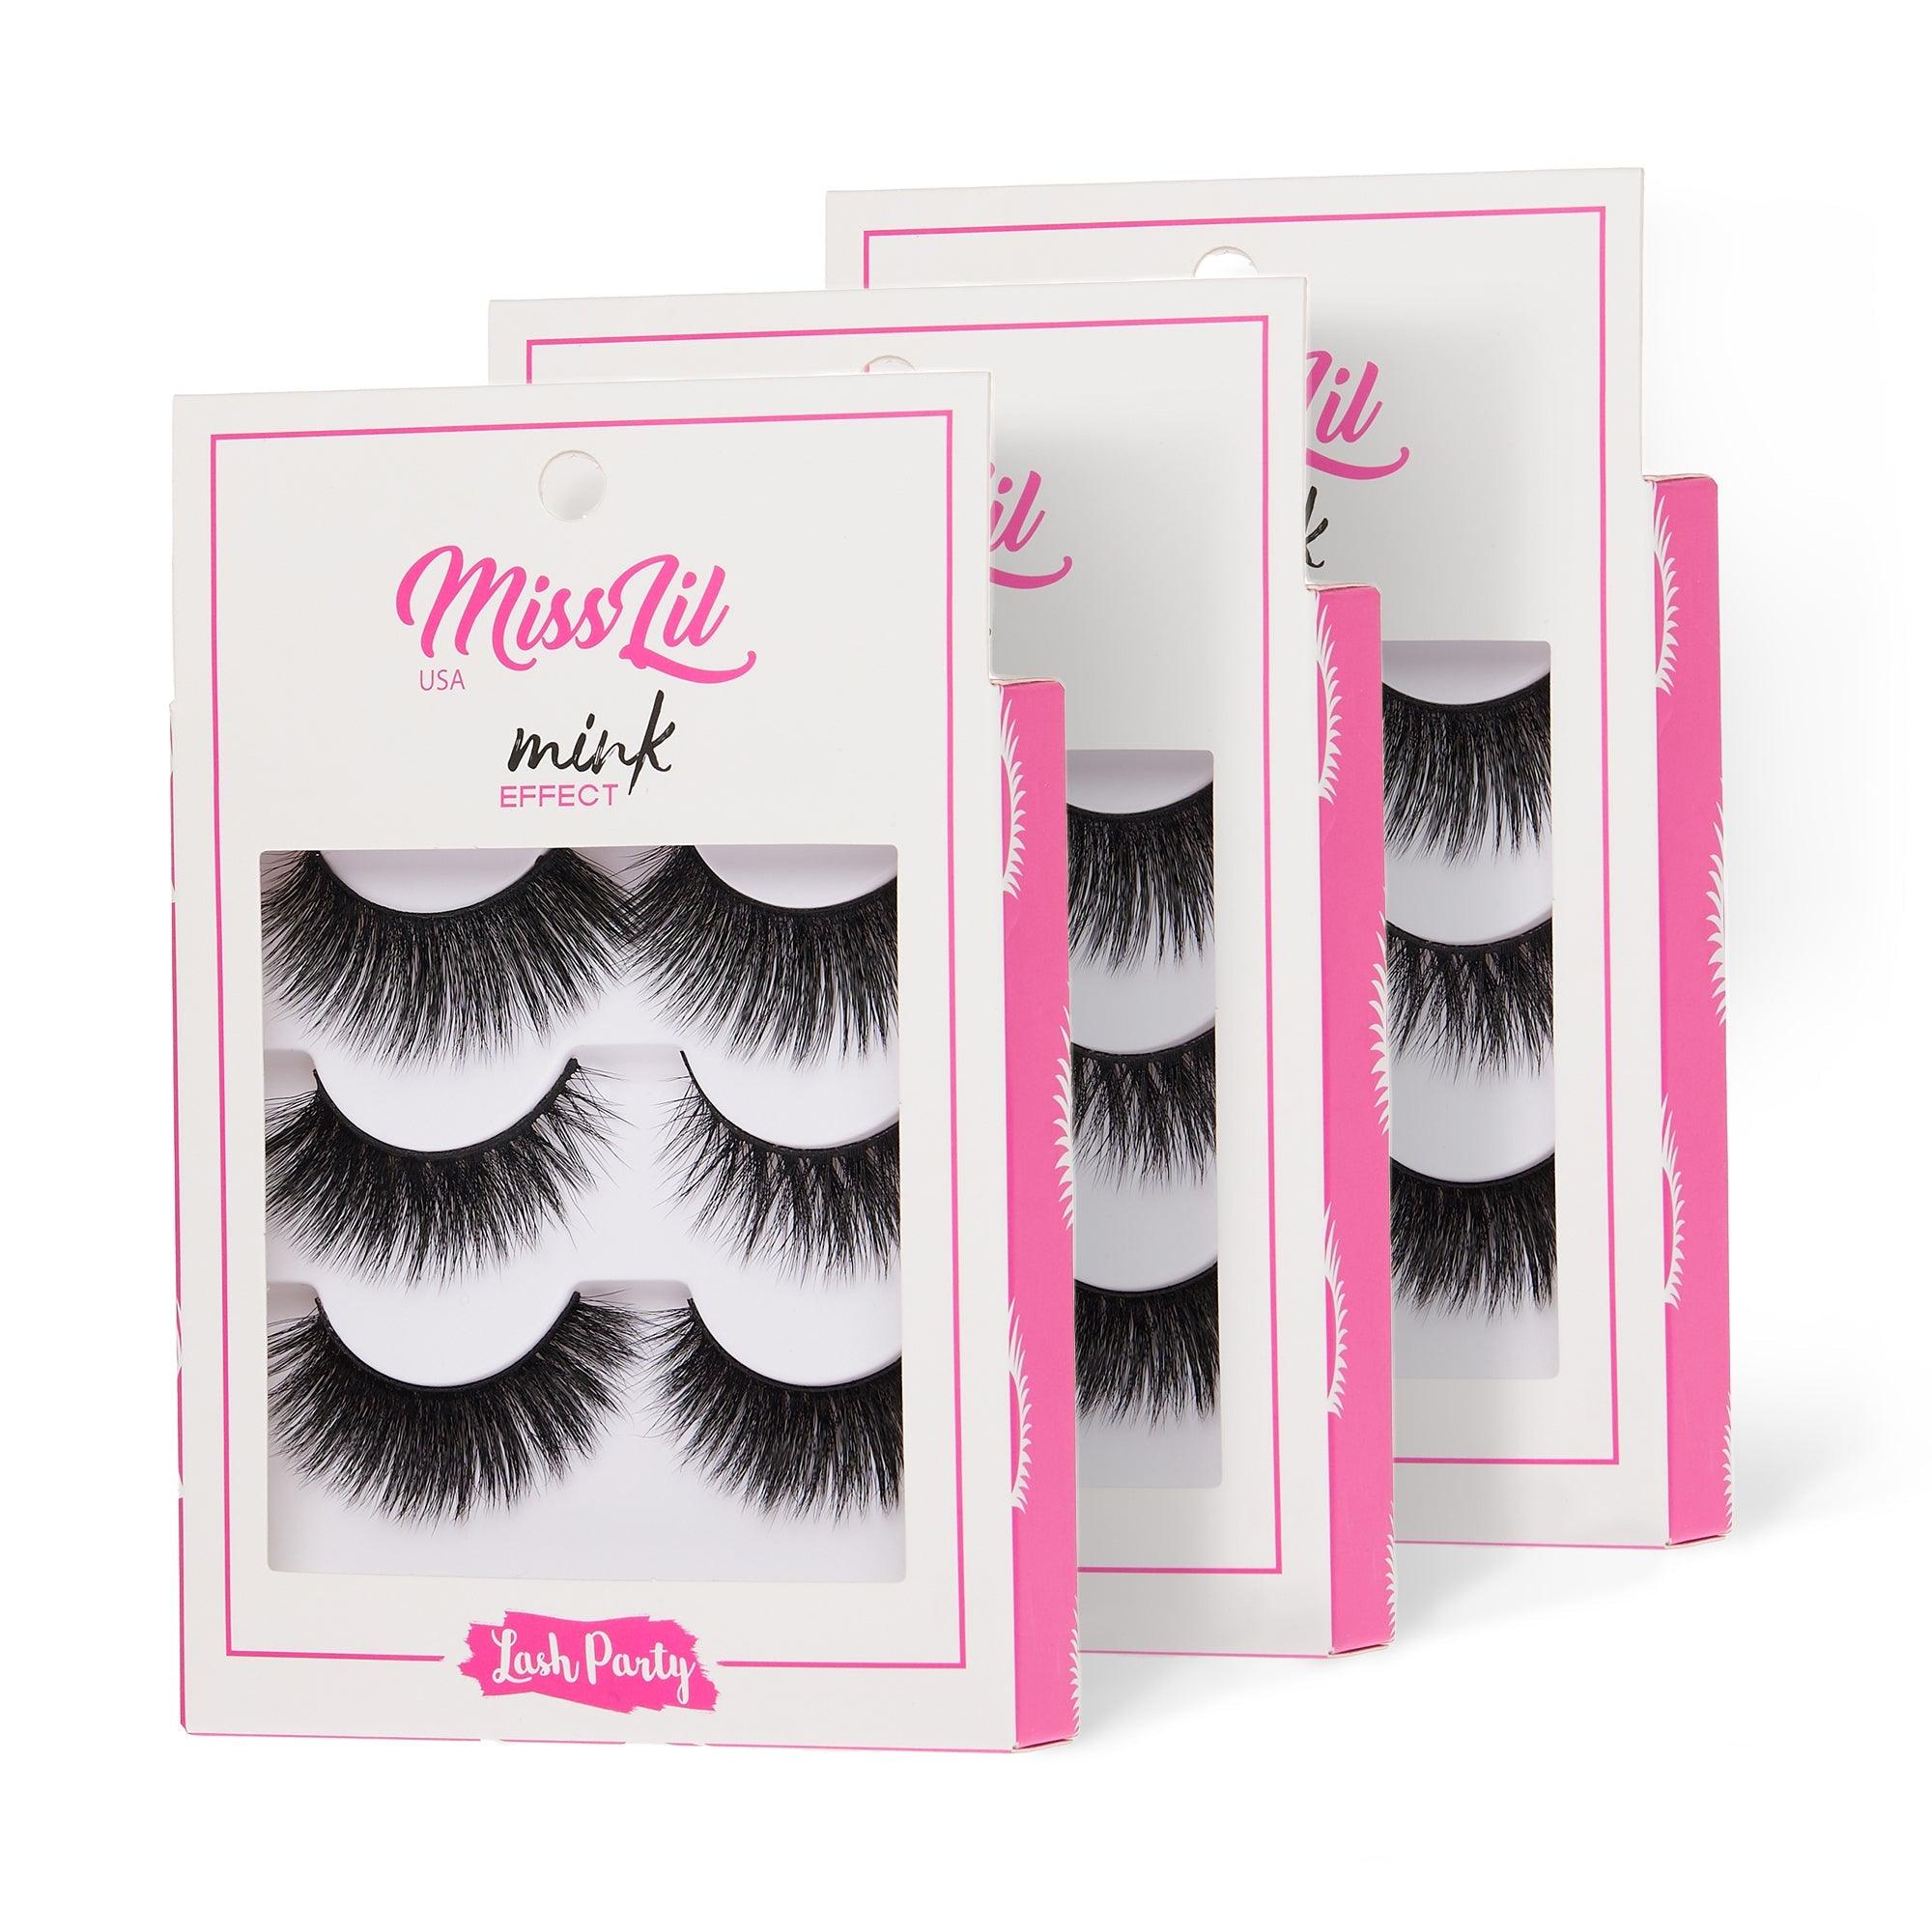 3-Pair Faux Mink Effect Eyelashes - Lash Party Collection #13 - Pack of 12 - Miss Lil USA